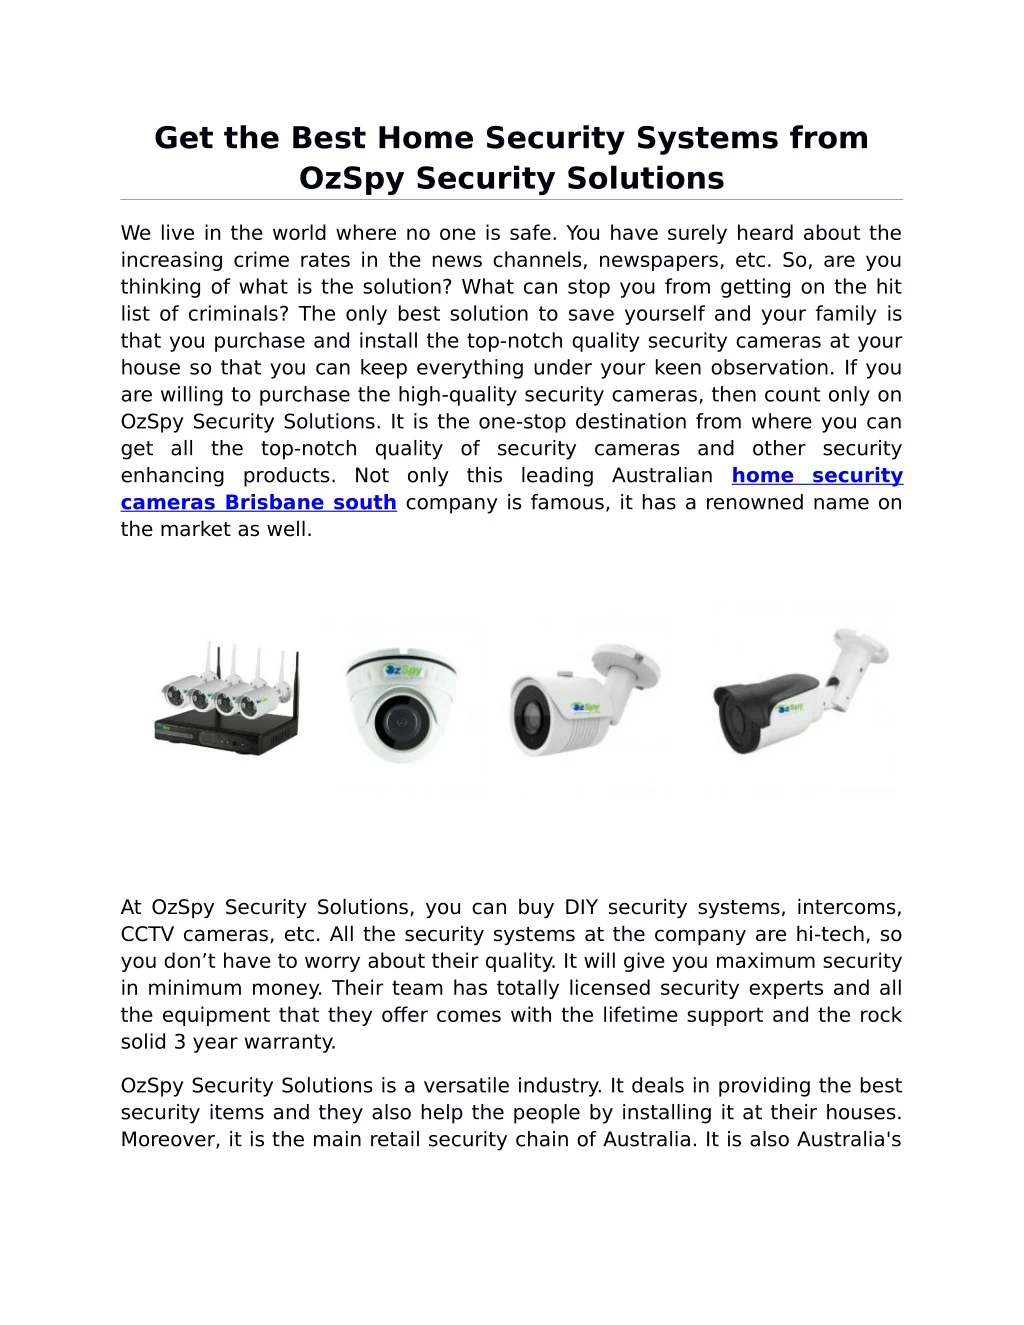 get the best home security systems from ozspy